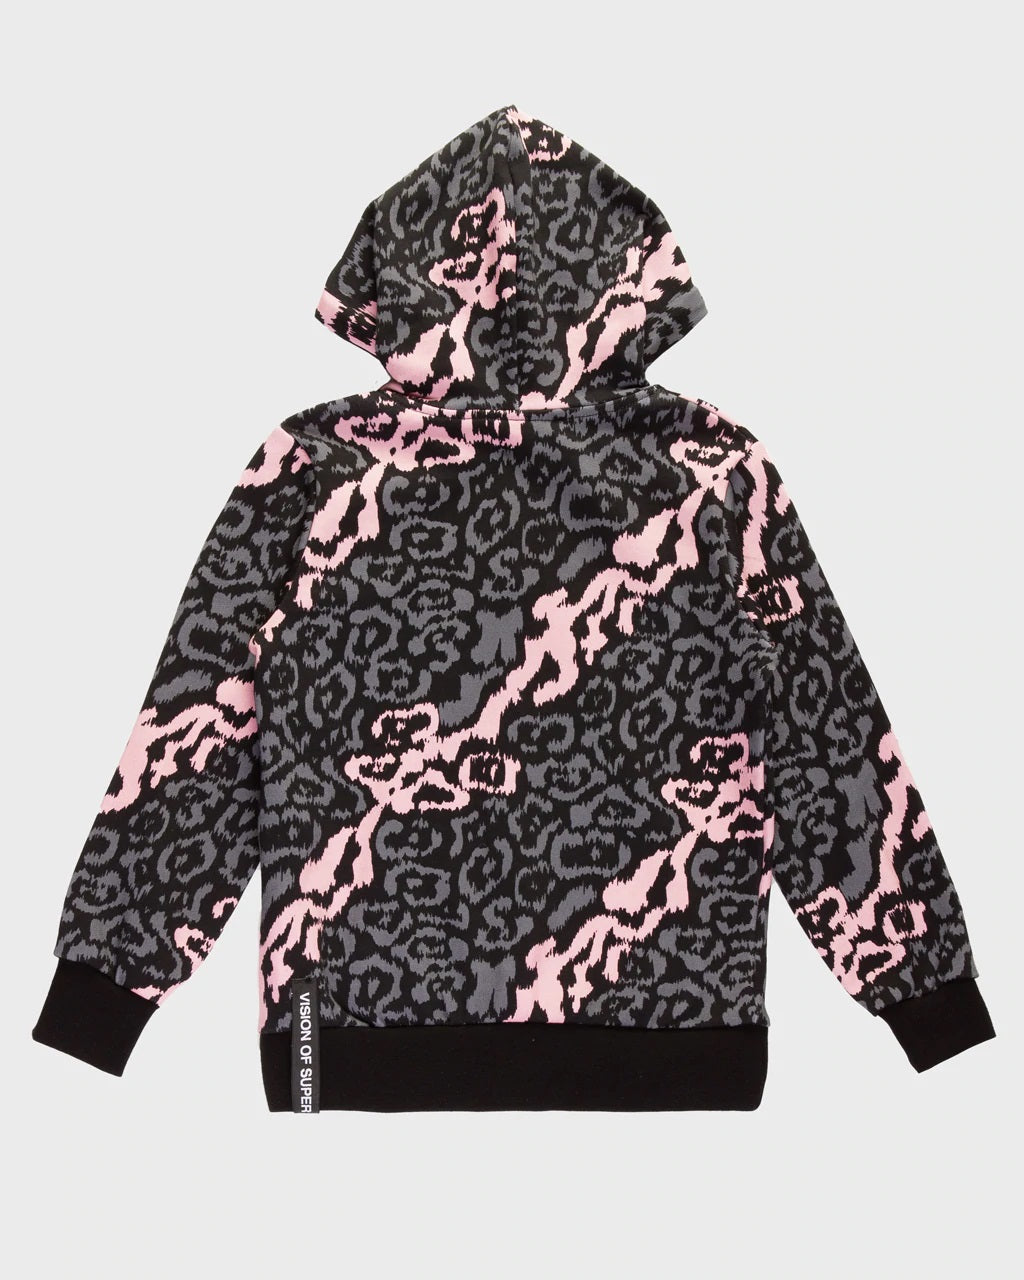 ALL OVER LEOPARD PINK HOODIE KIDS